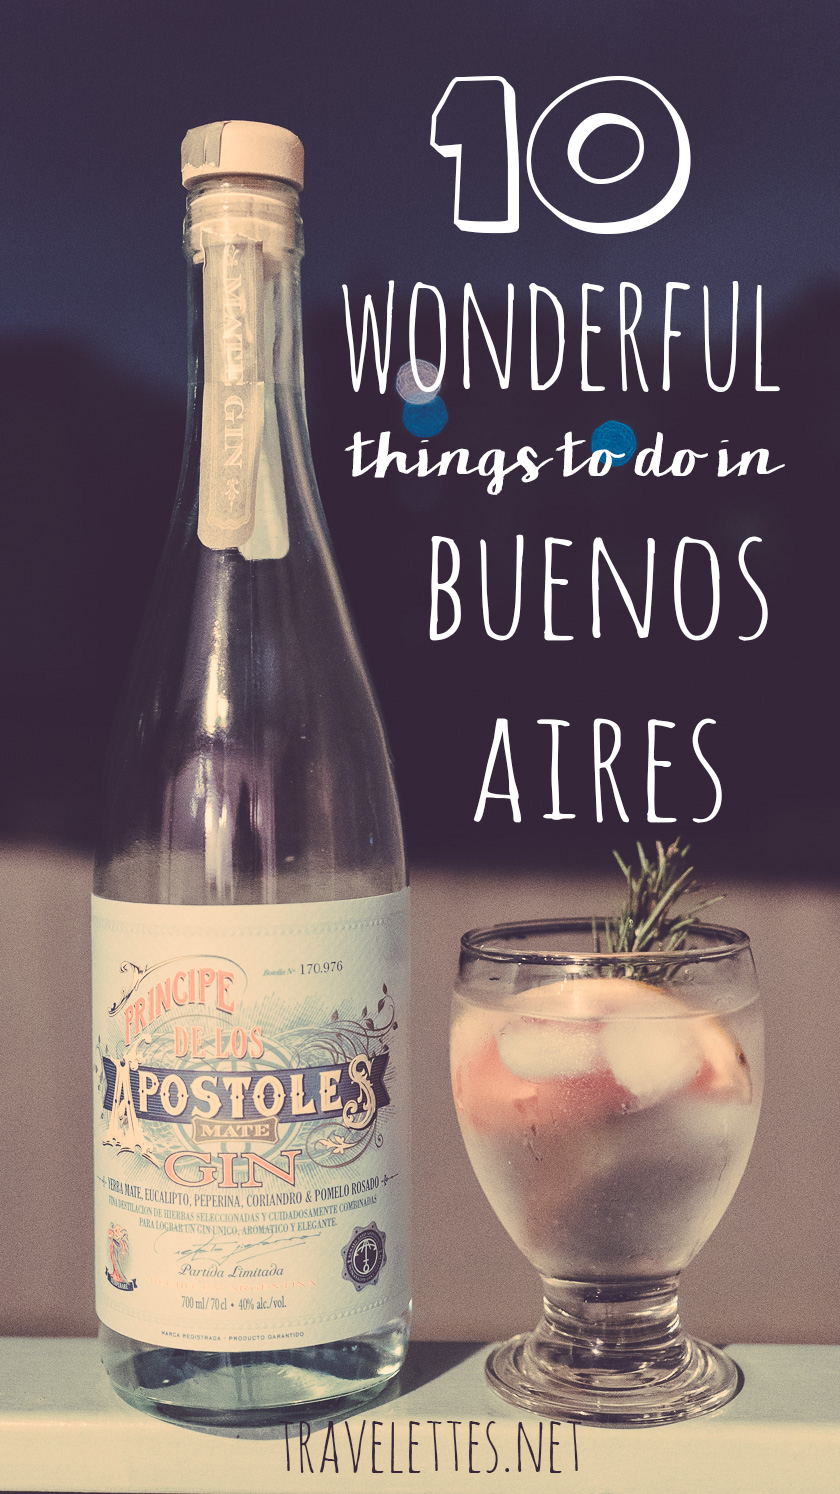 Ten wonderful things to do in Buenos Aires